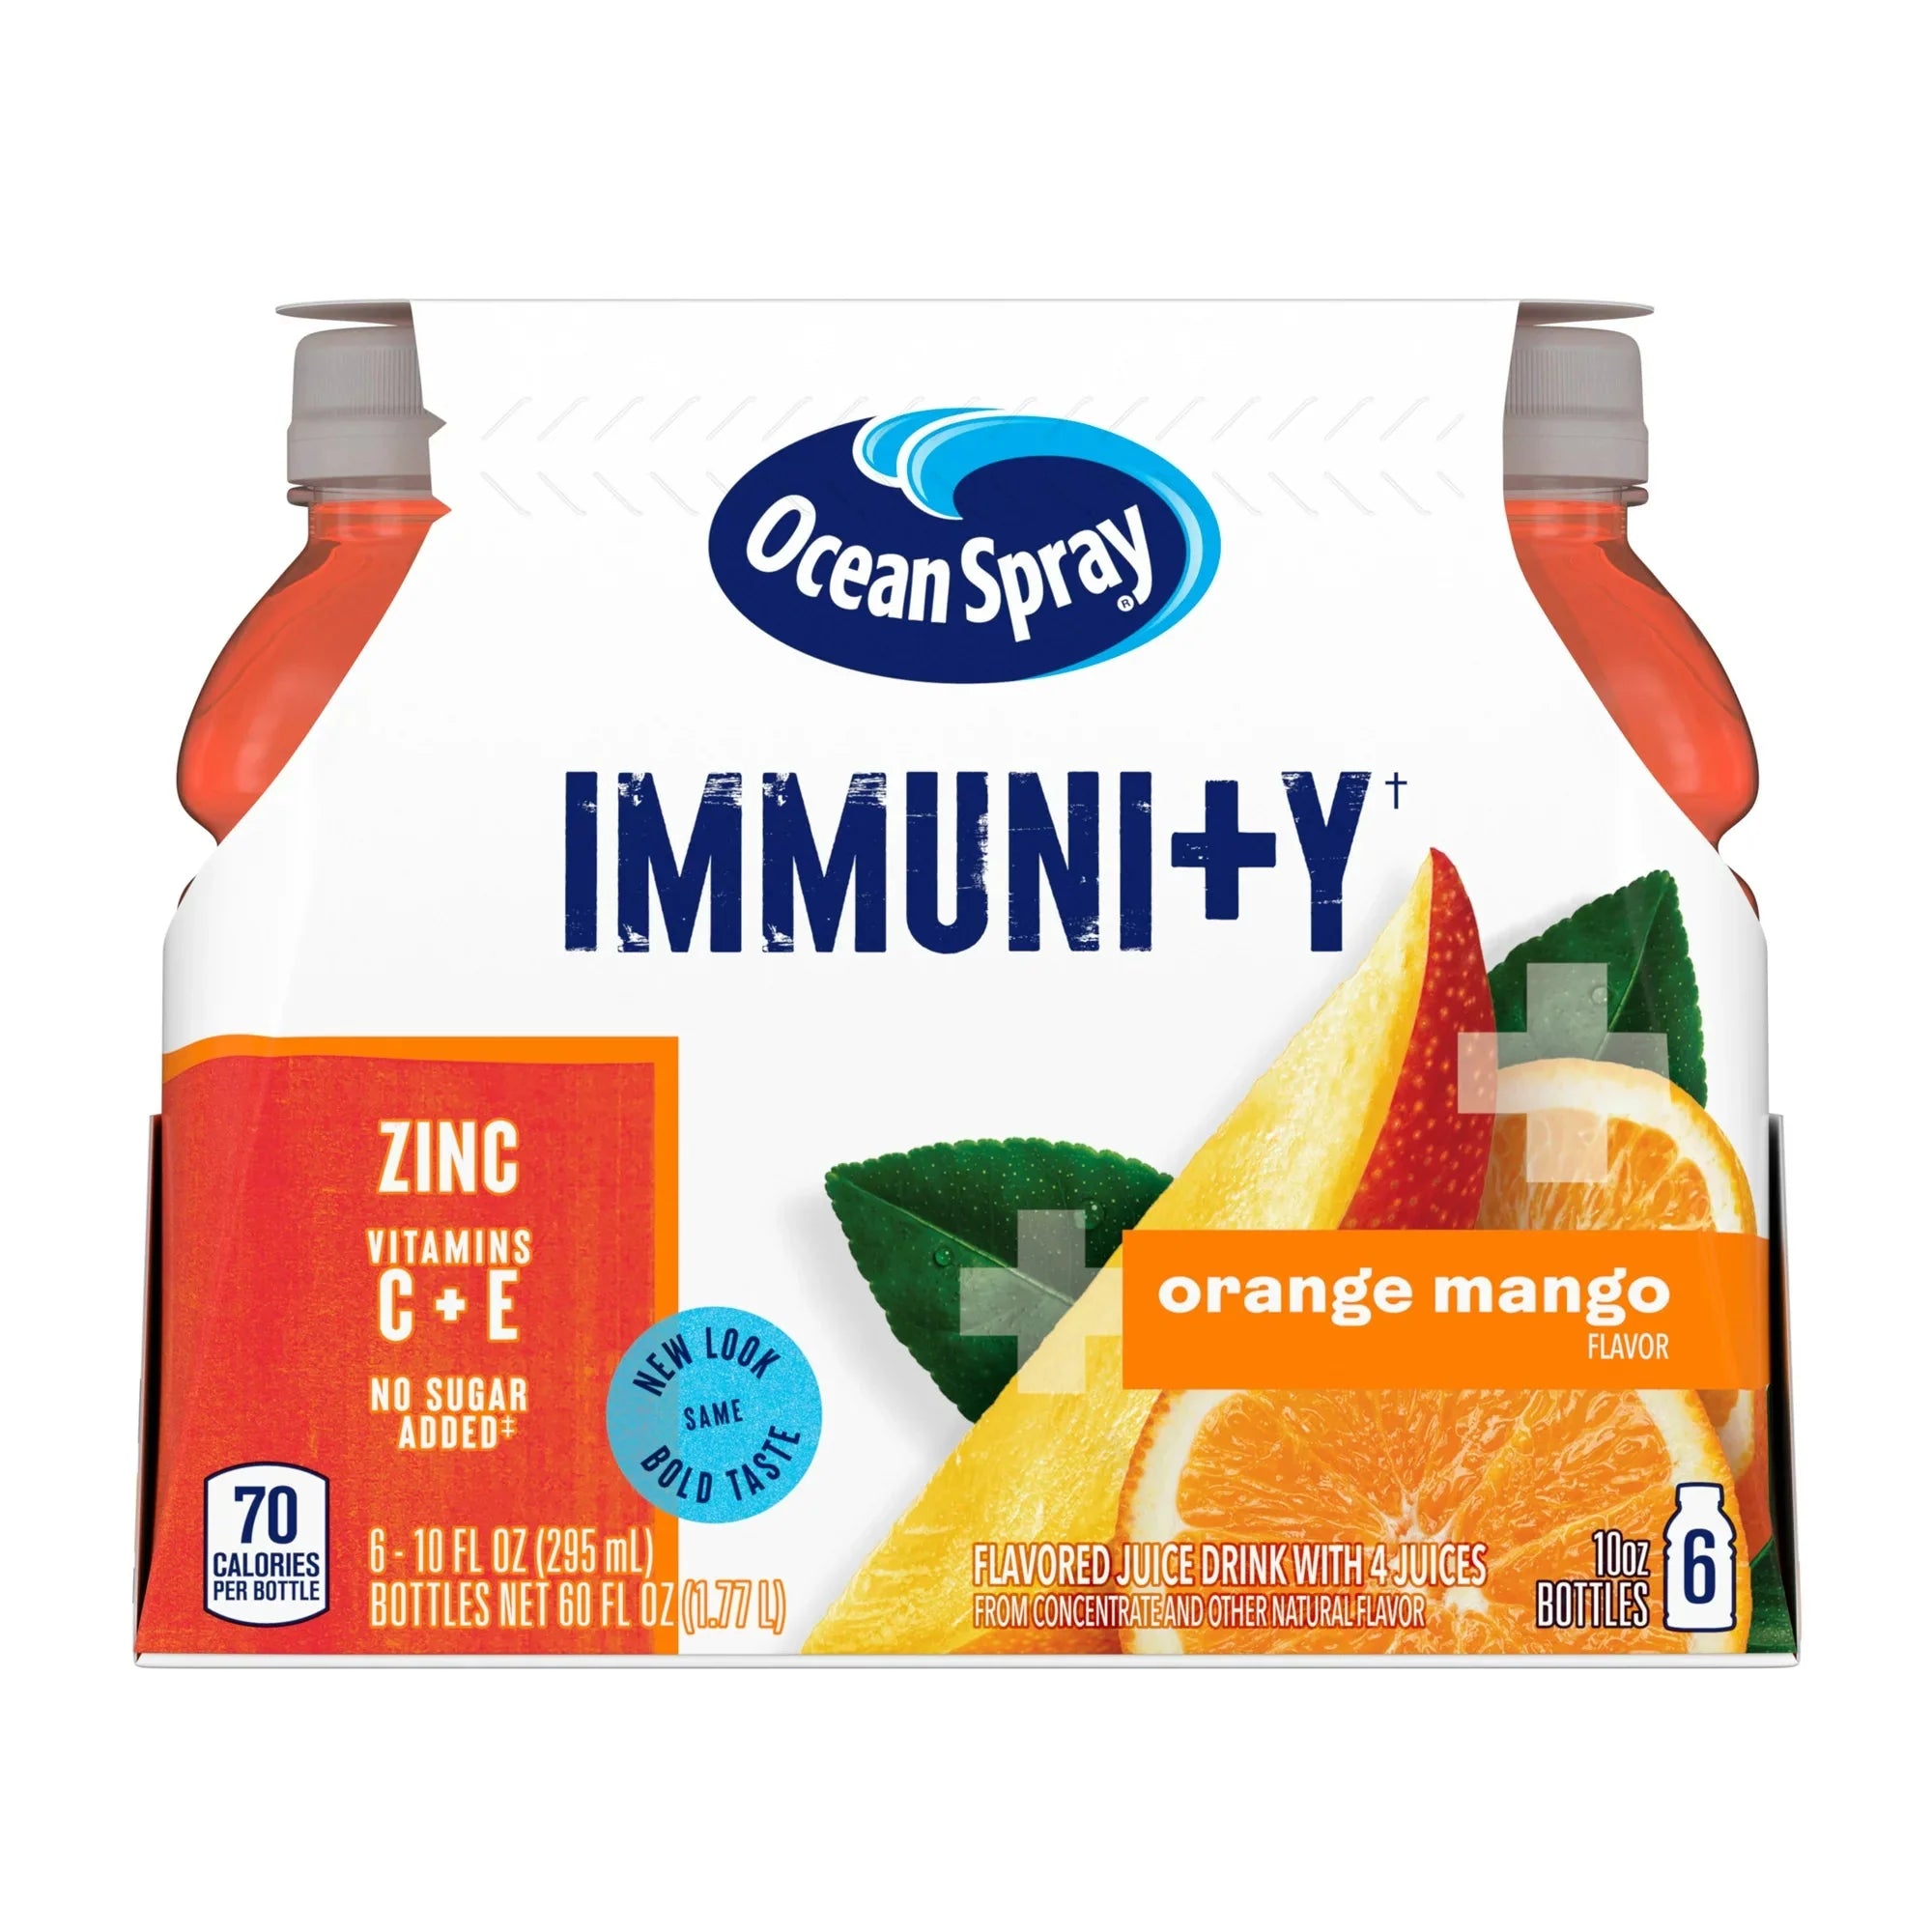 Wholesale prices with free shipping all over United States Ocean Spray® Immunity Orange Mango Juice Drink, 10 fl oz Bottles, 6 Count - Steven Deals